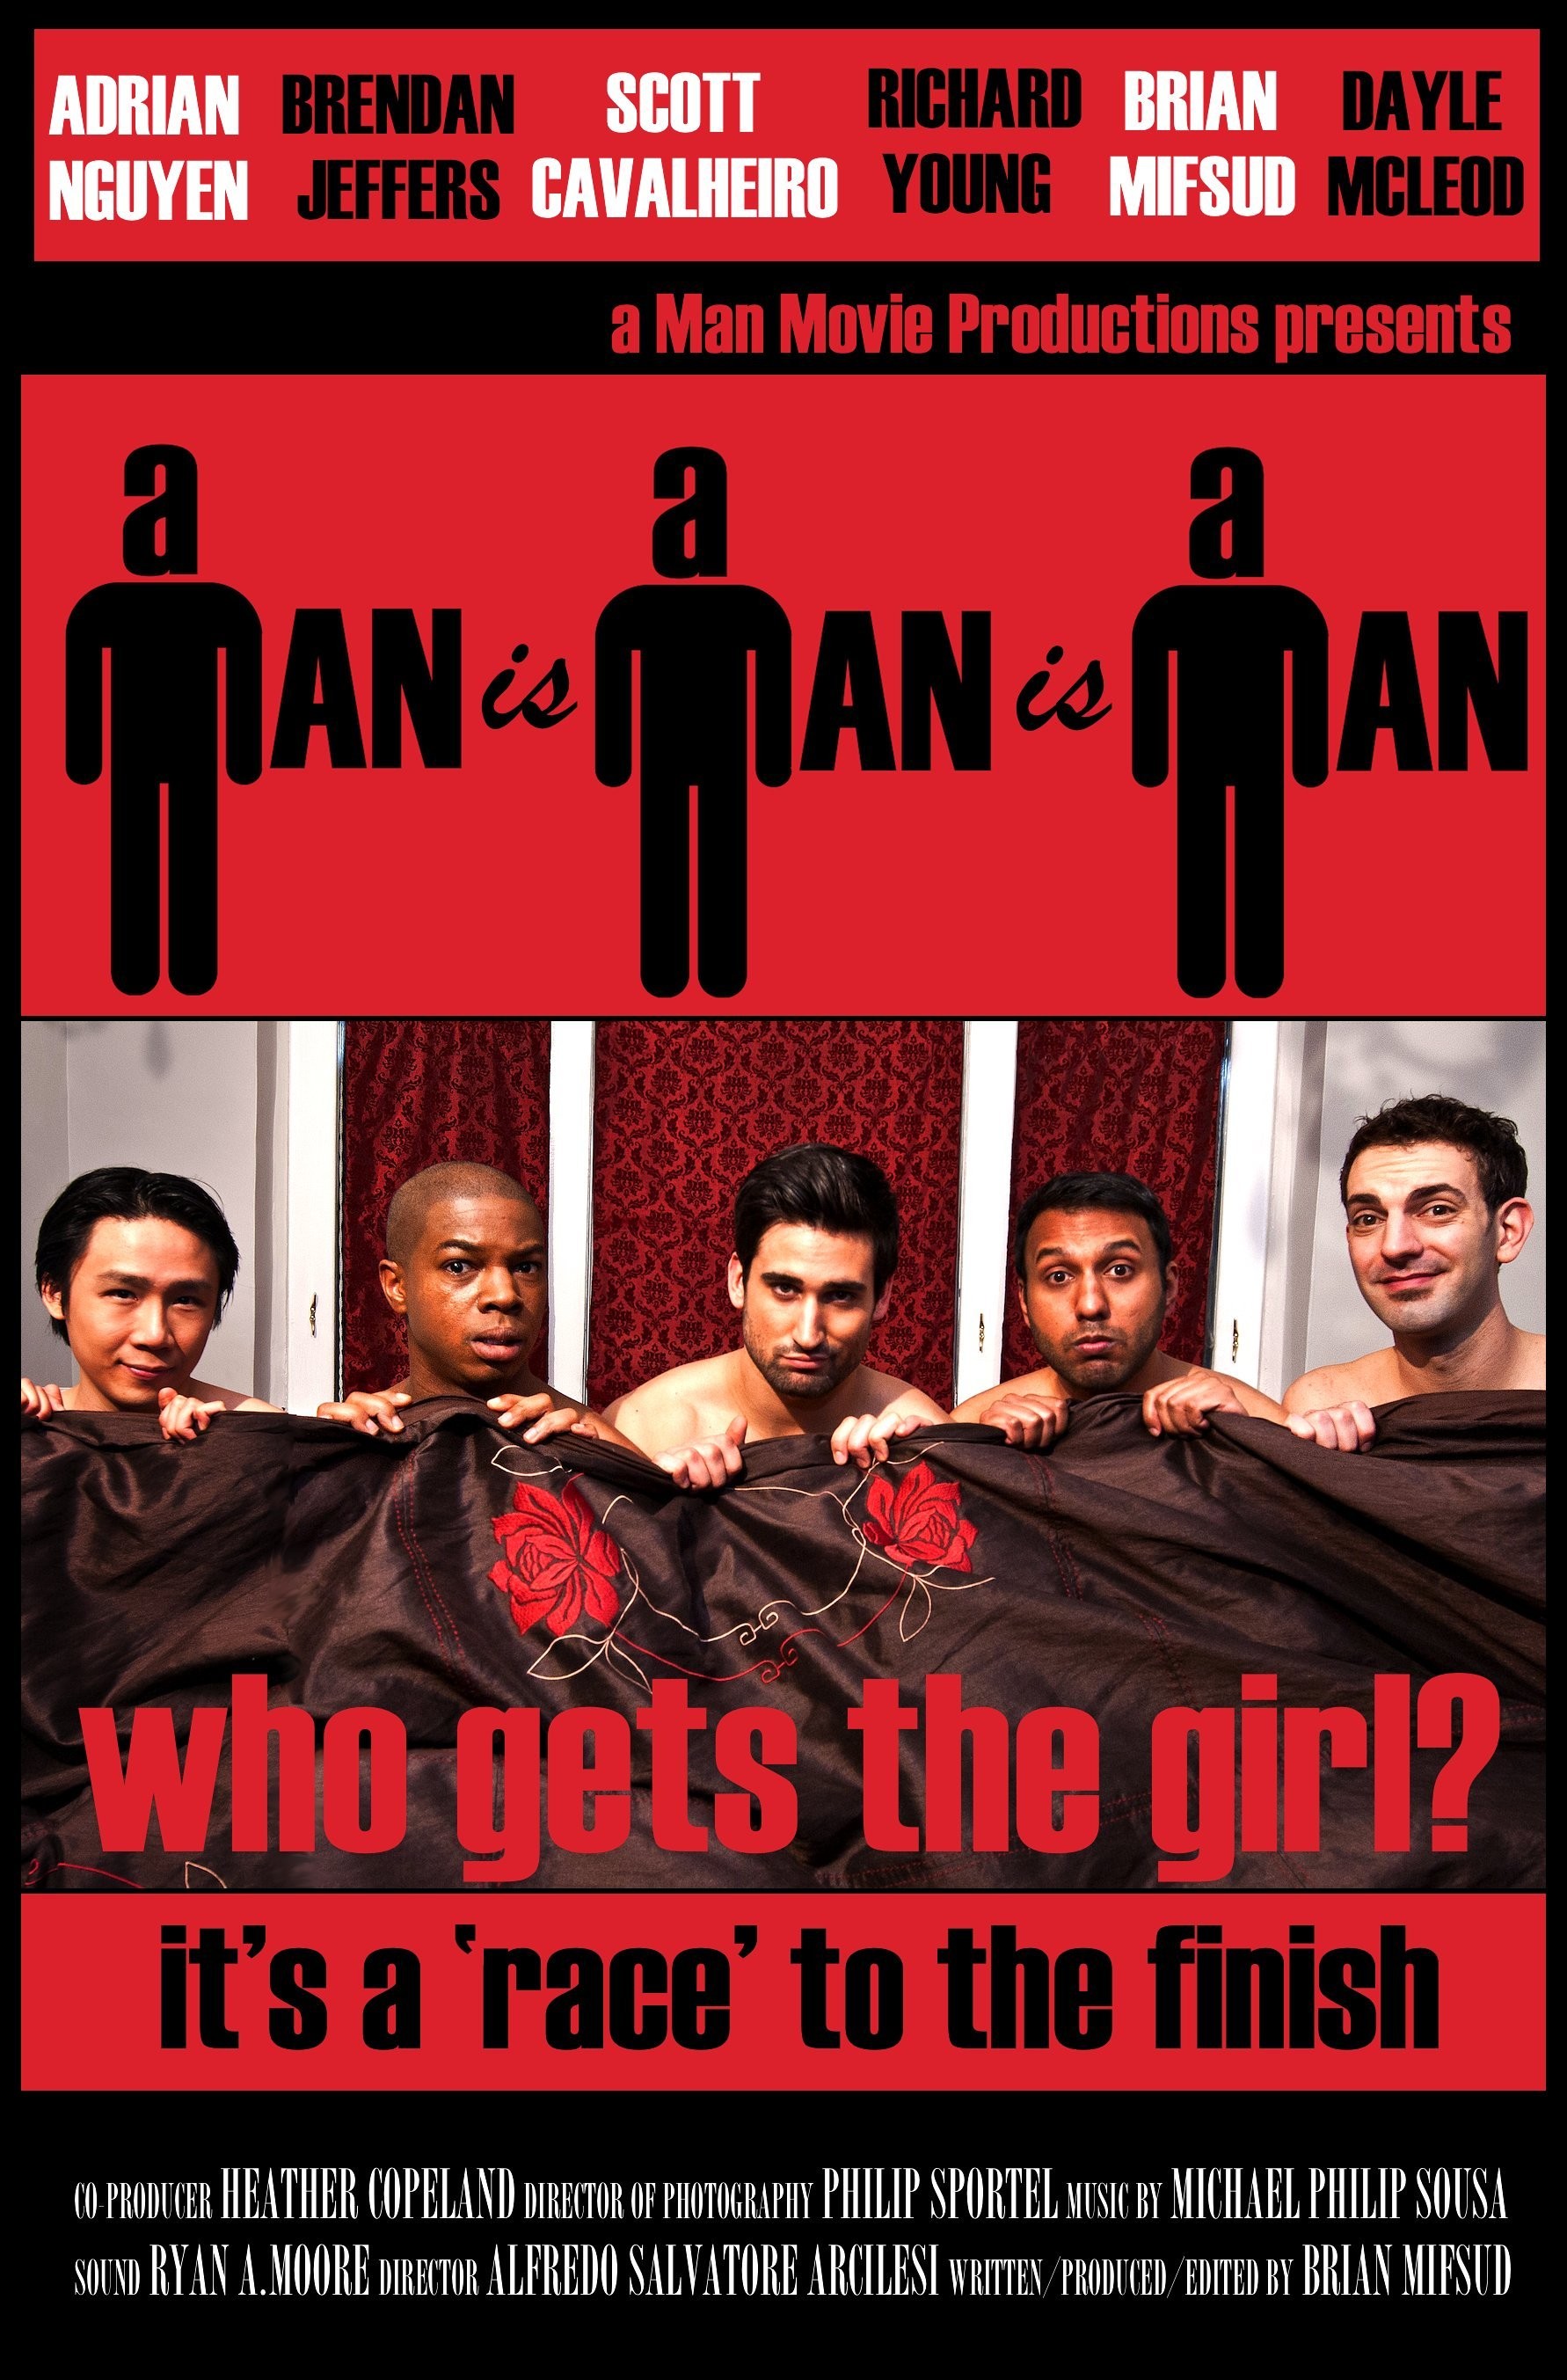 Mega Sized Movie Poster Image for A Man Is a Man Is a Man